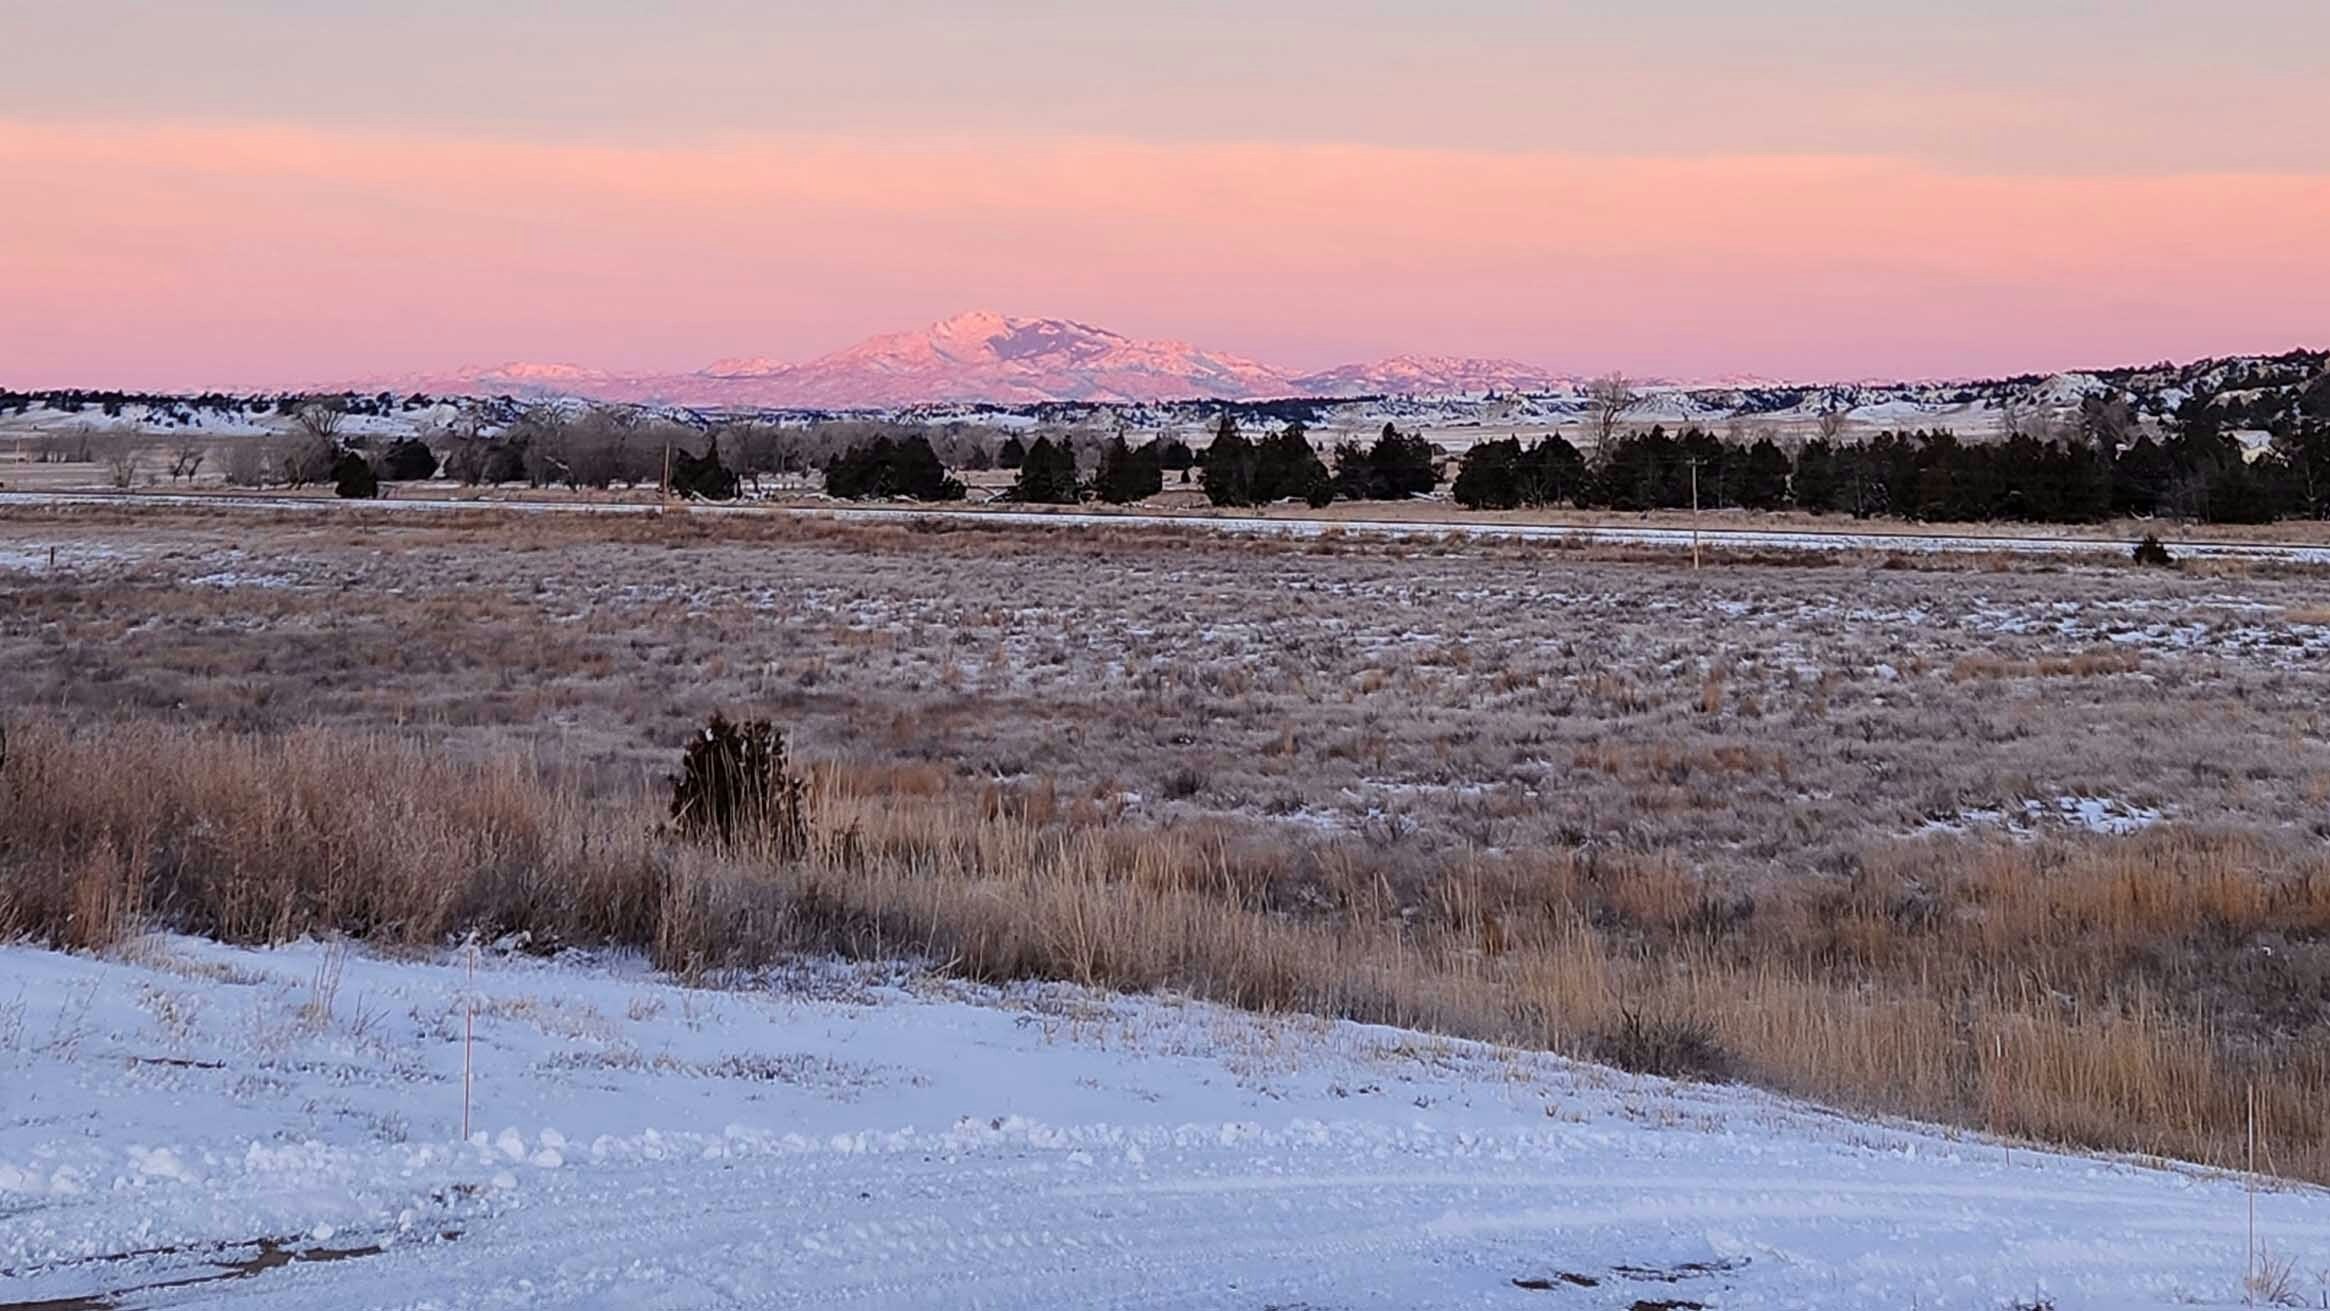 Reader photo: "Guernsey sunrise with Laramie Peak from outside of my home."